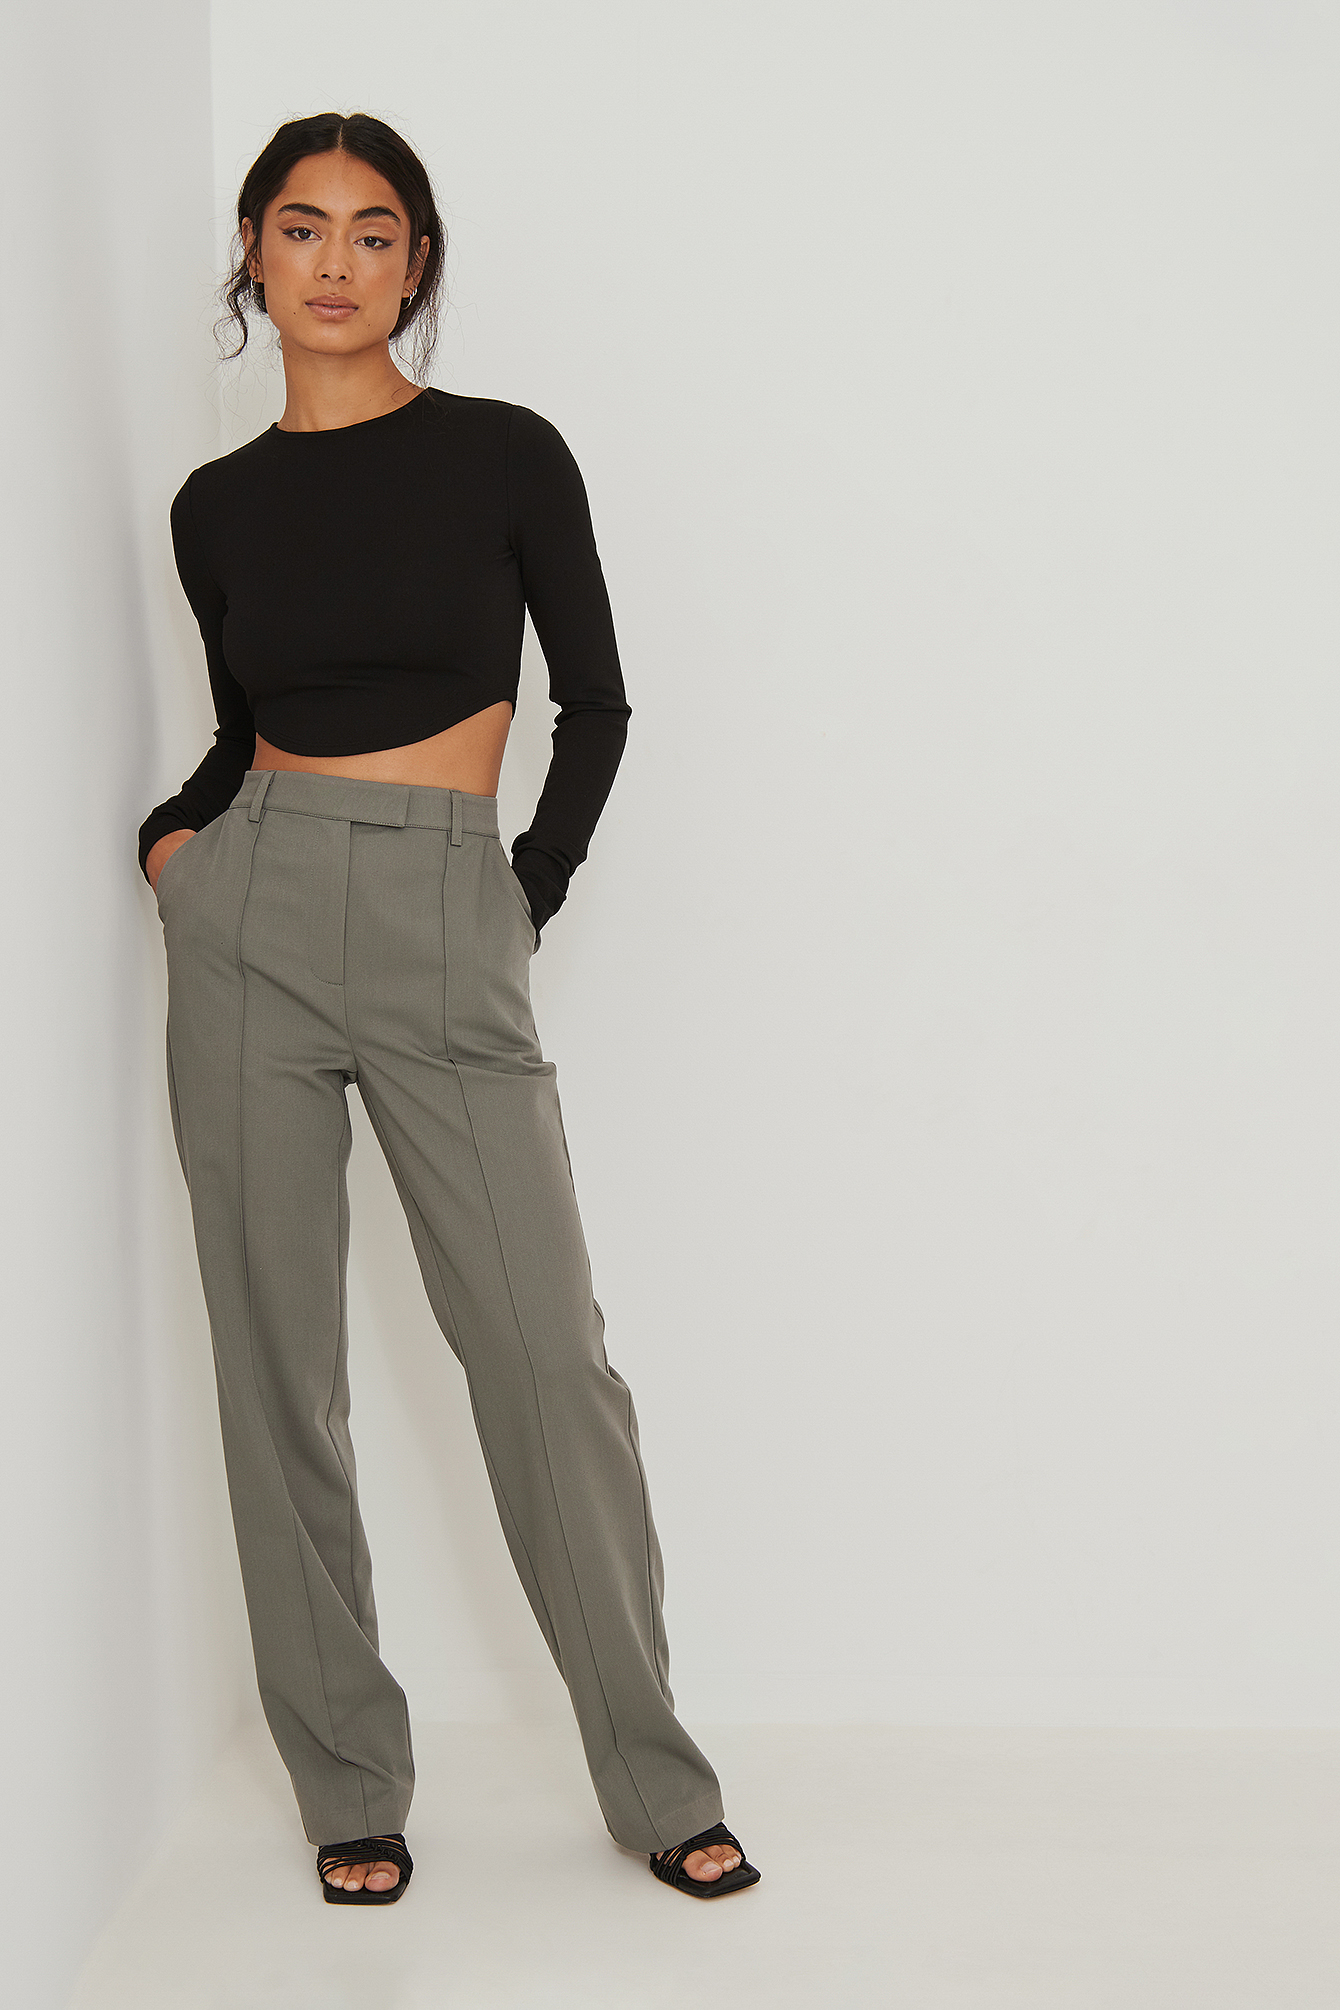 High Waist Pin Seam Suit Pants Outfit